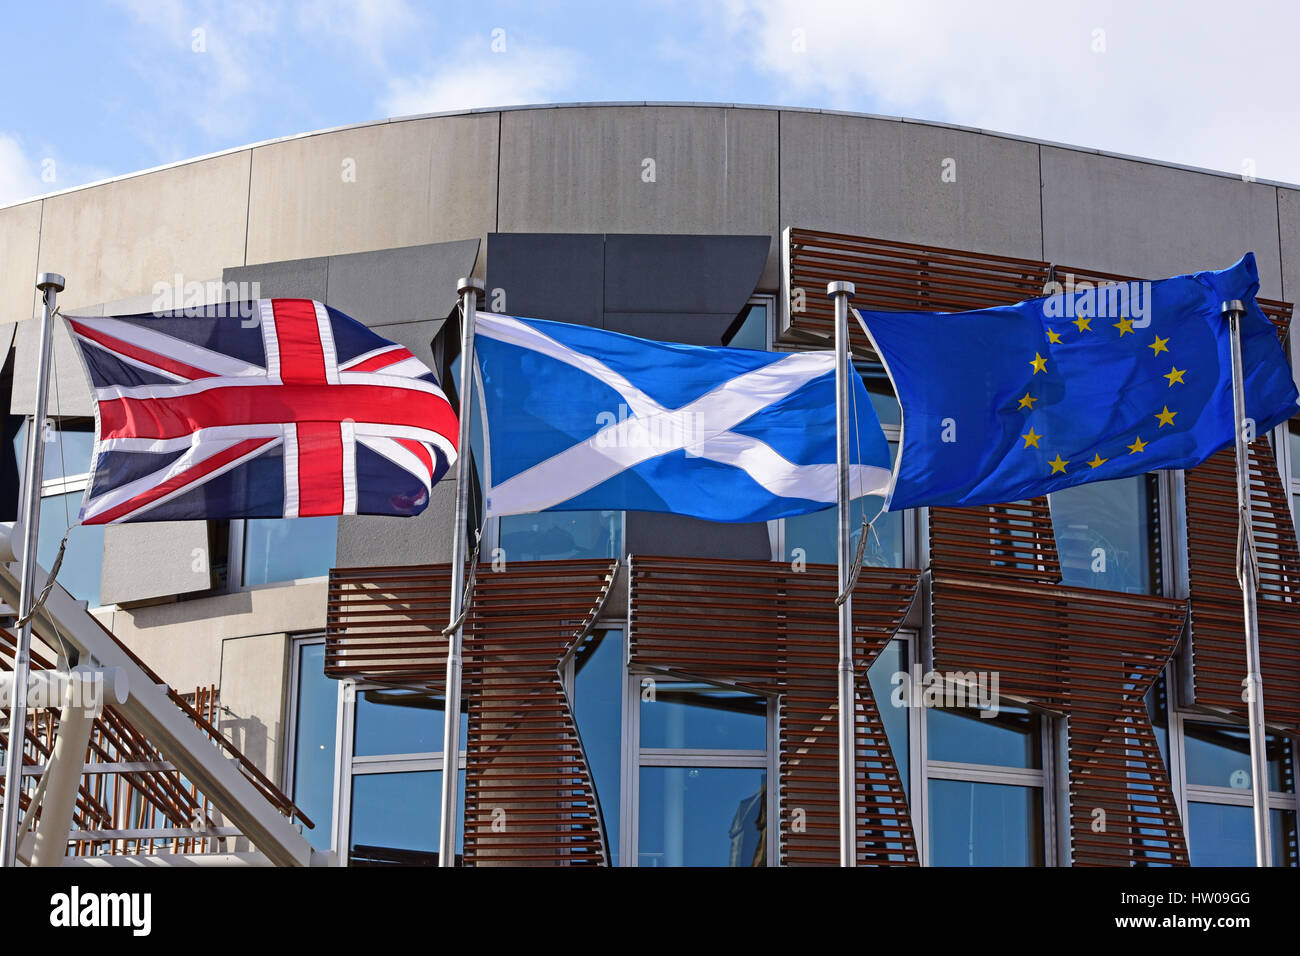 Edinburgh, Scotland, UK. 14th March 2017. The union flag, Scottish saltire, and flag of the European Union fly outside the Scottish Parliament on the day after First Minister Nicola Sturgeon announced she will seek approval to hold another referendum on Scottish independence, citing the UK Government's supposed reluctance to make a separate case for Scotland in Brexit negotiations, Credit: Ken Jack/Alamy Live News Stock Photo